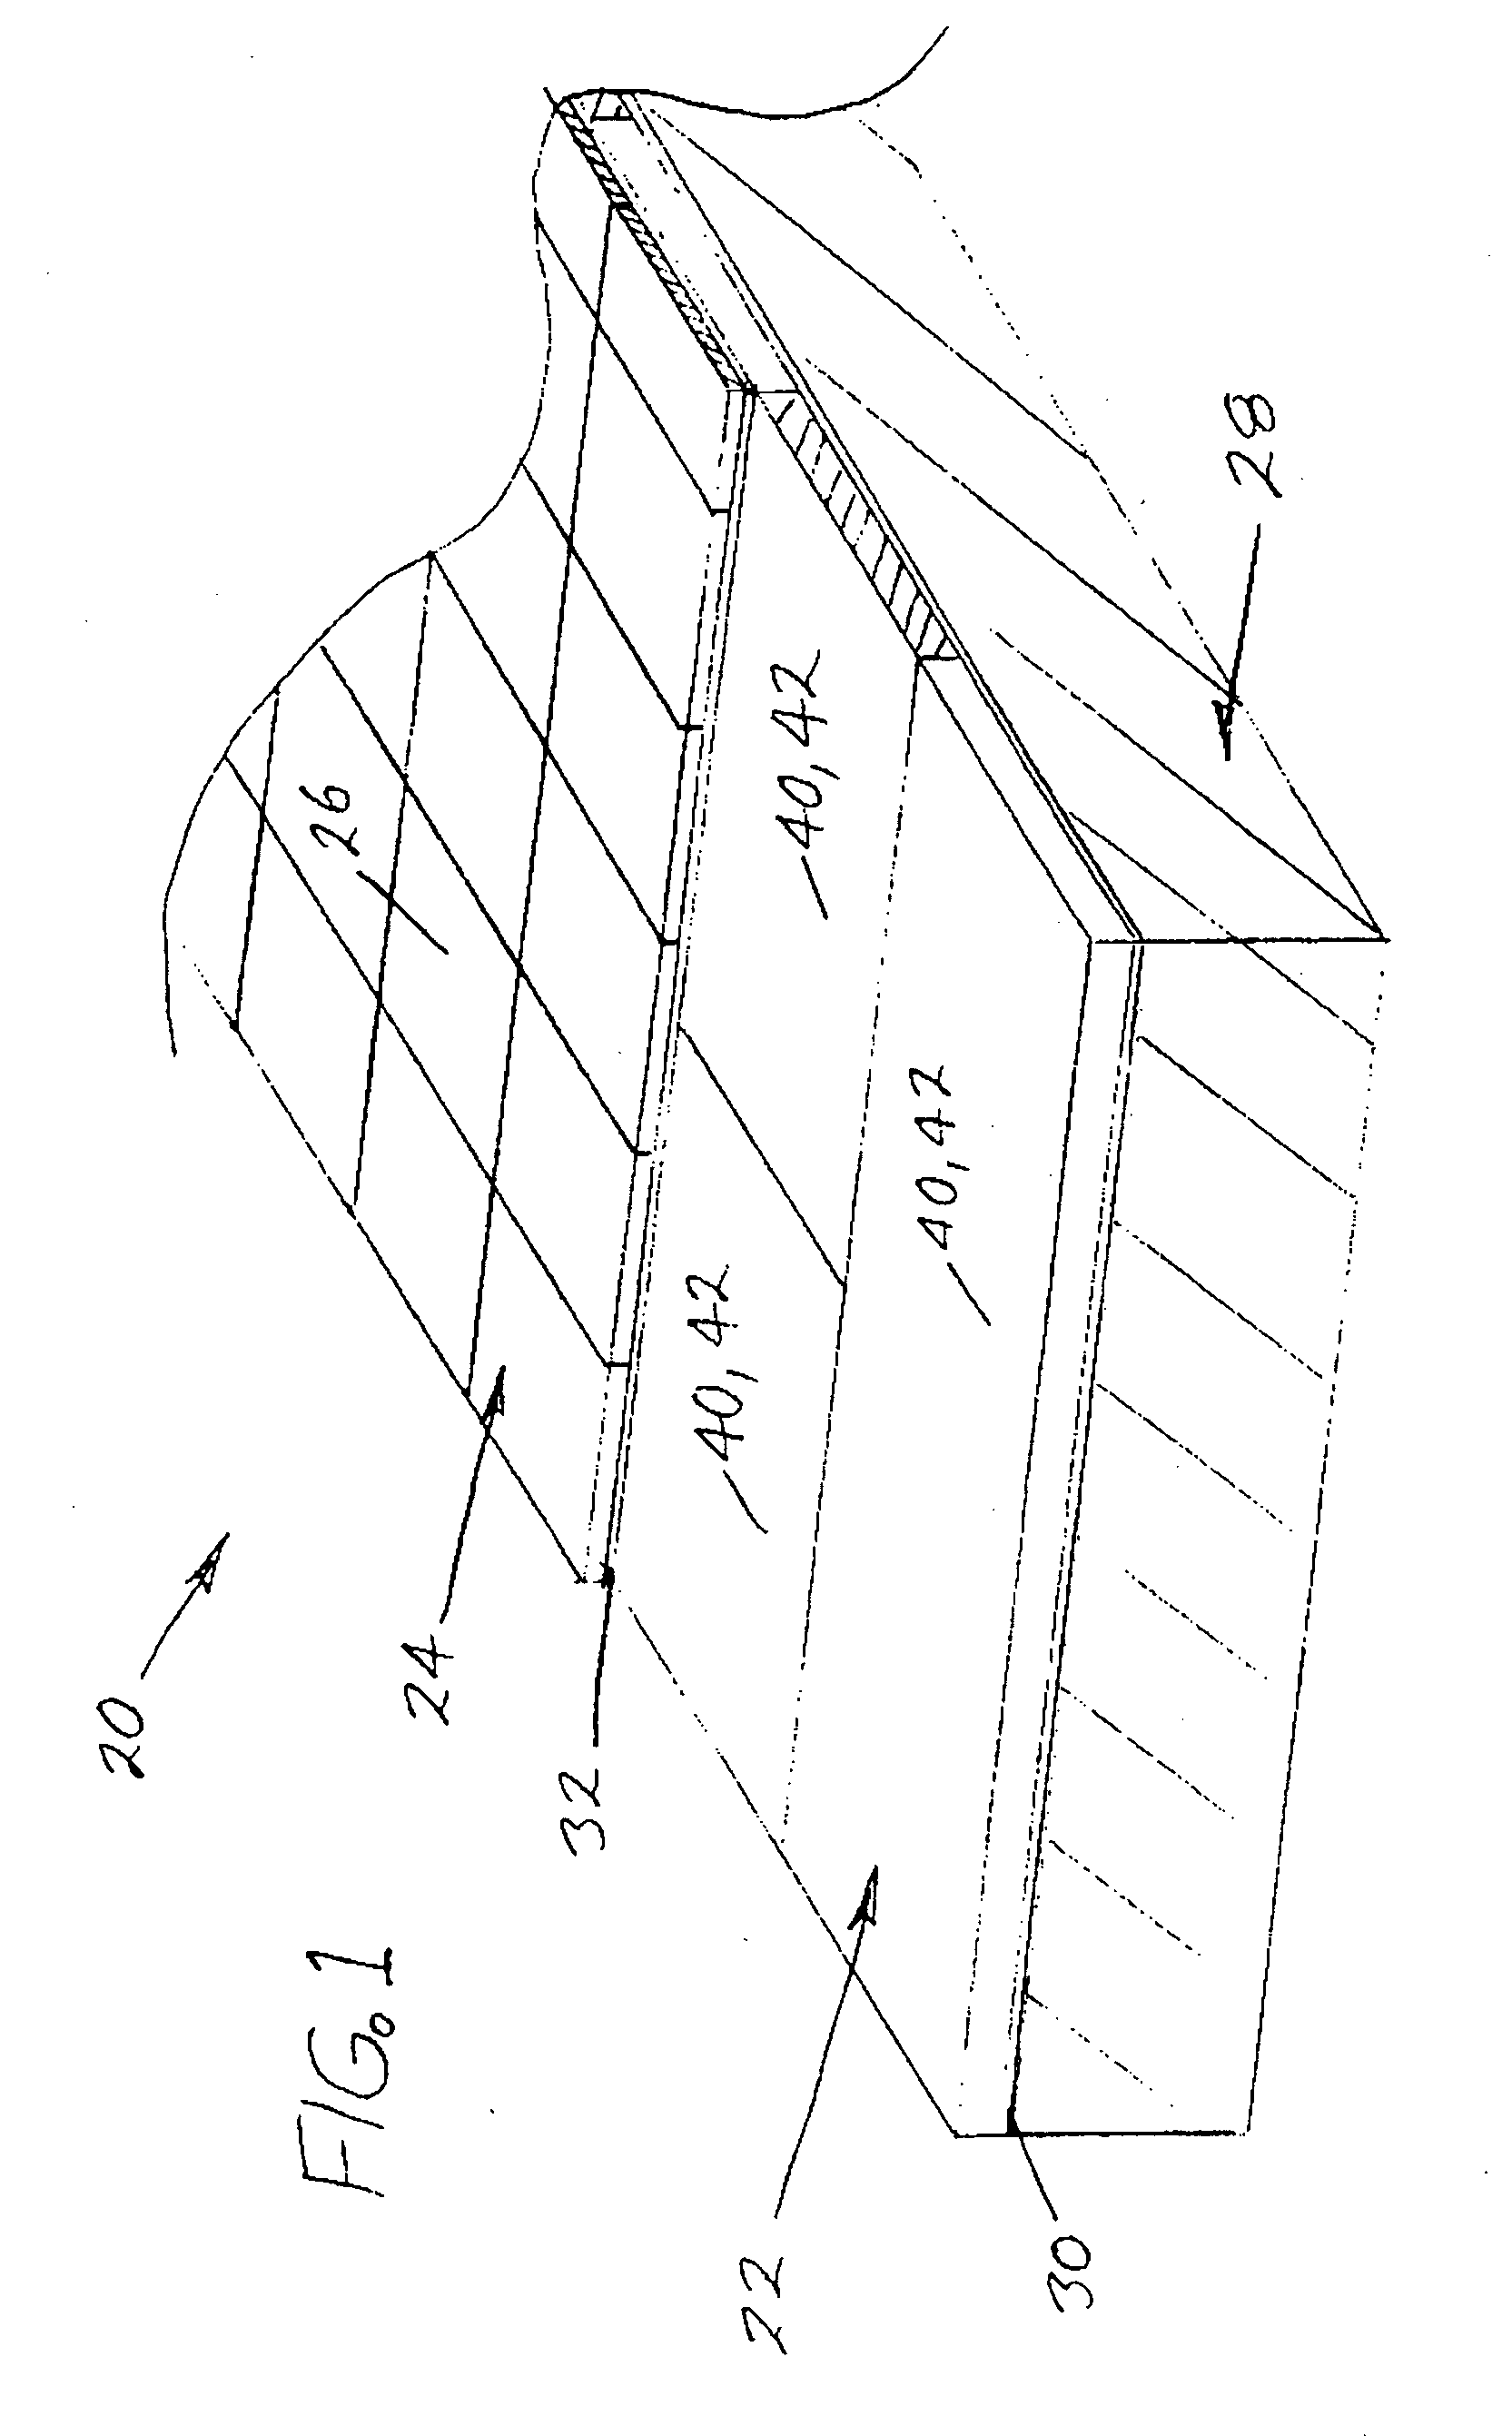 Polymer-based composite structural underlayment board and flooring system